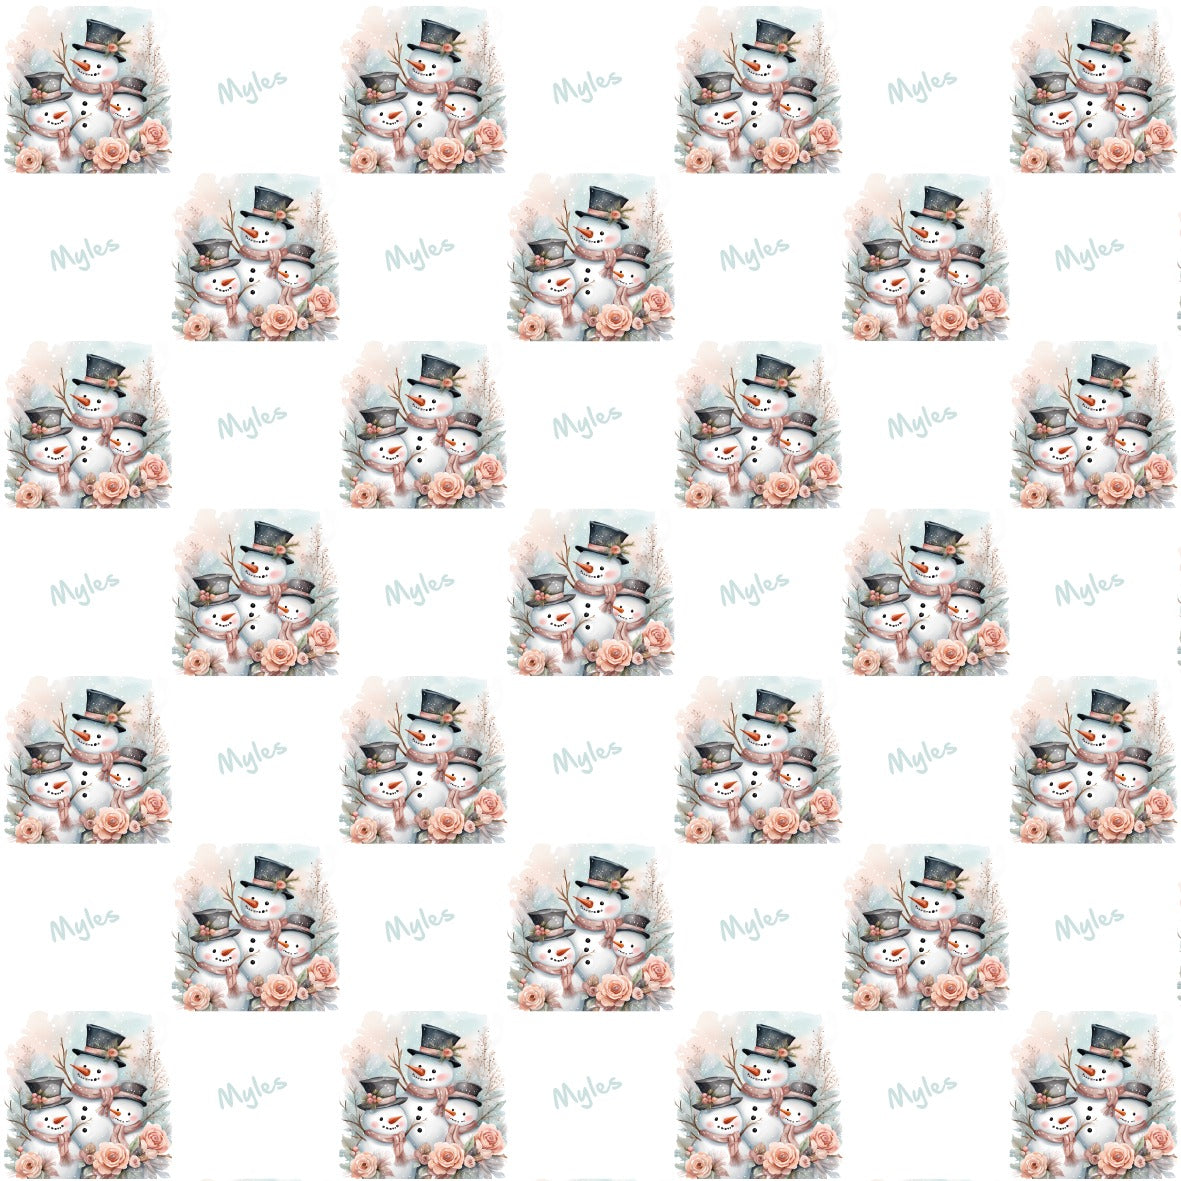 Snowman Wrapping paper with customizable name beside, a group of 3 snowmen in image as a family of snowmen. Repeating Pattern